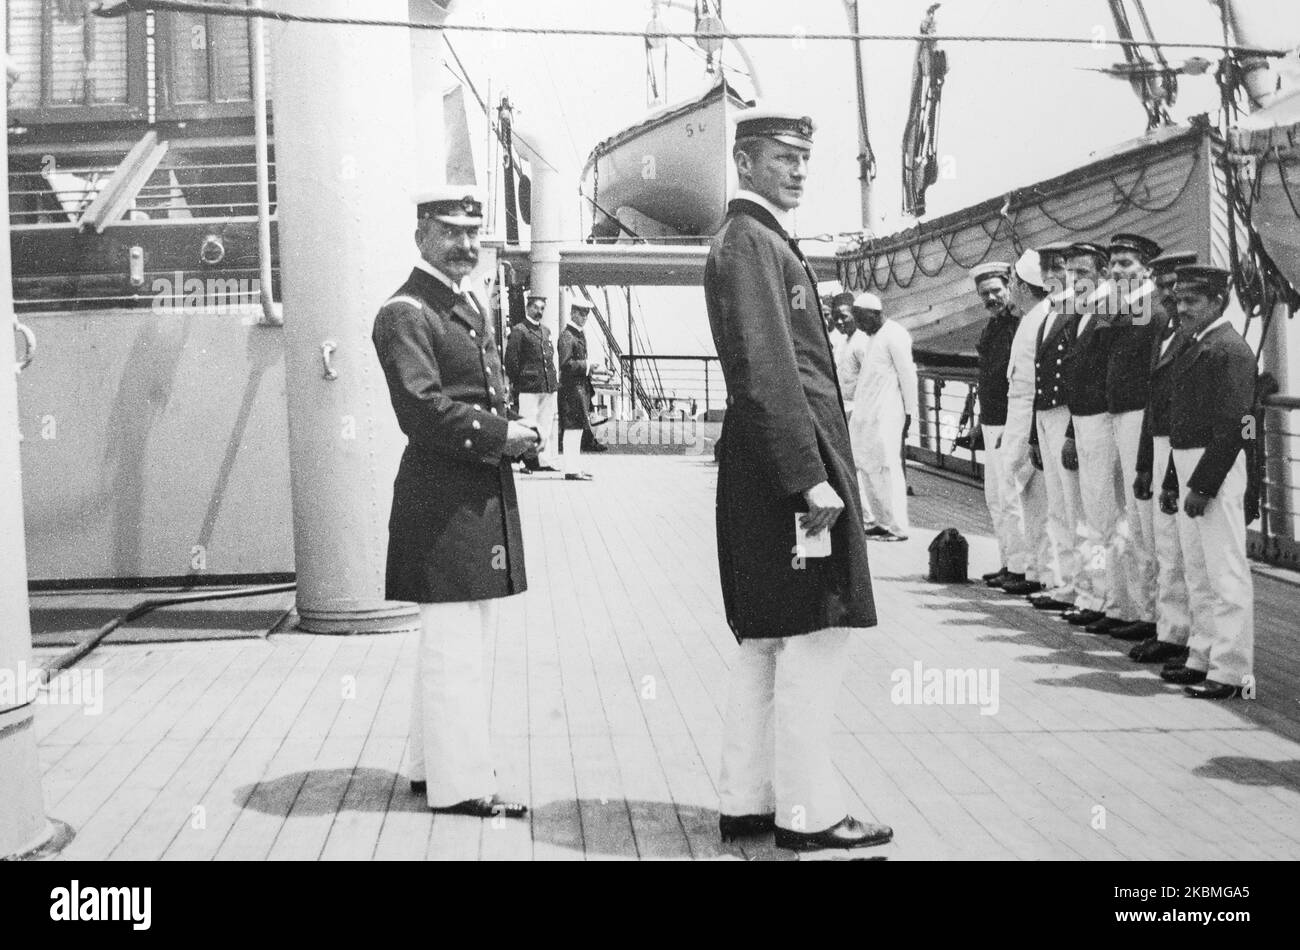 The Captain of a ship, carrying British troops and supplied for The Boer War, inspects his crew members on deck. Stock Photo